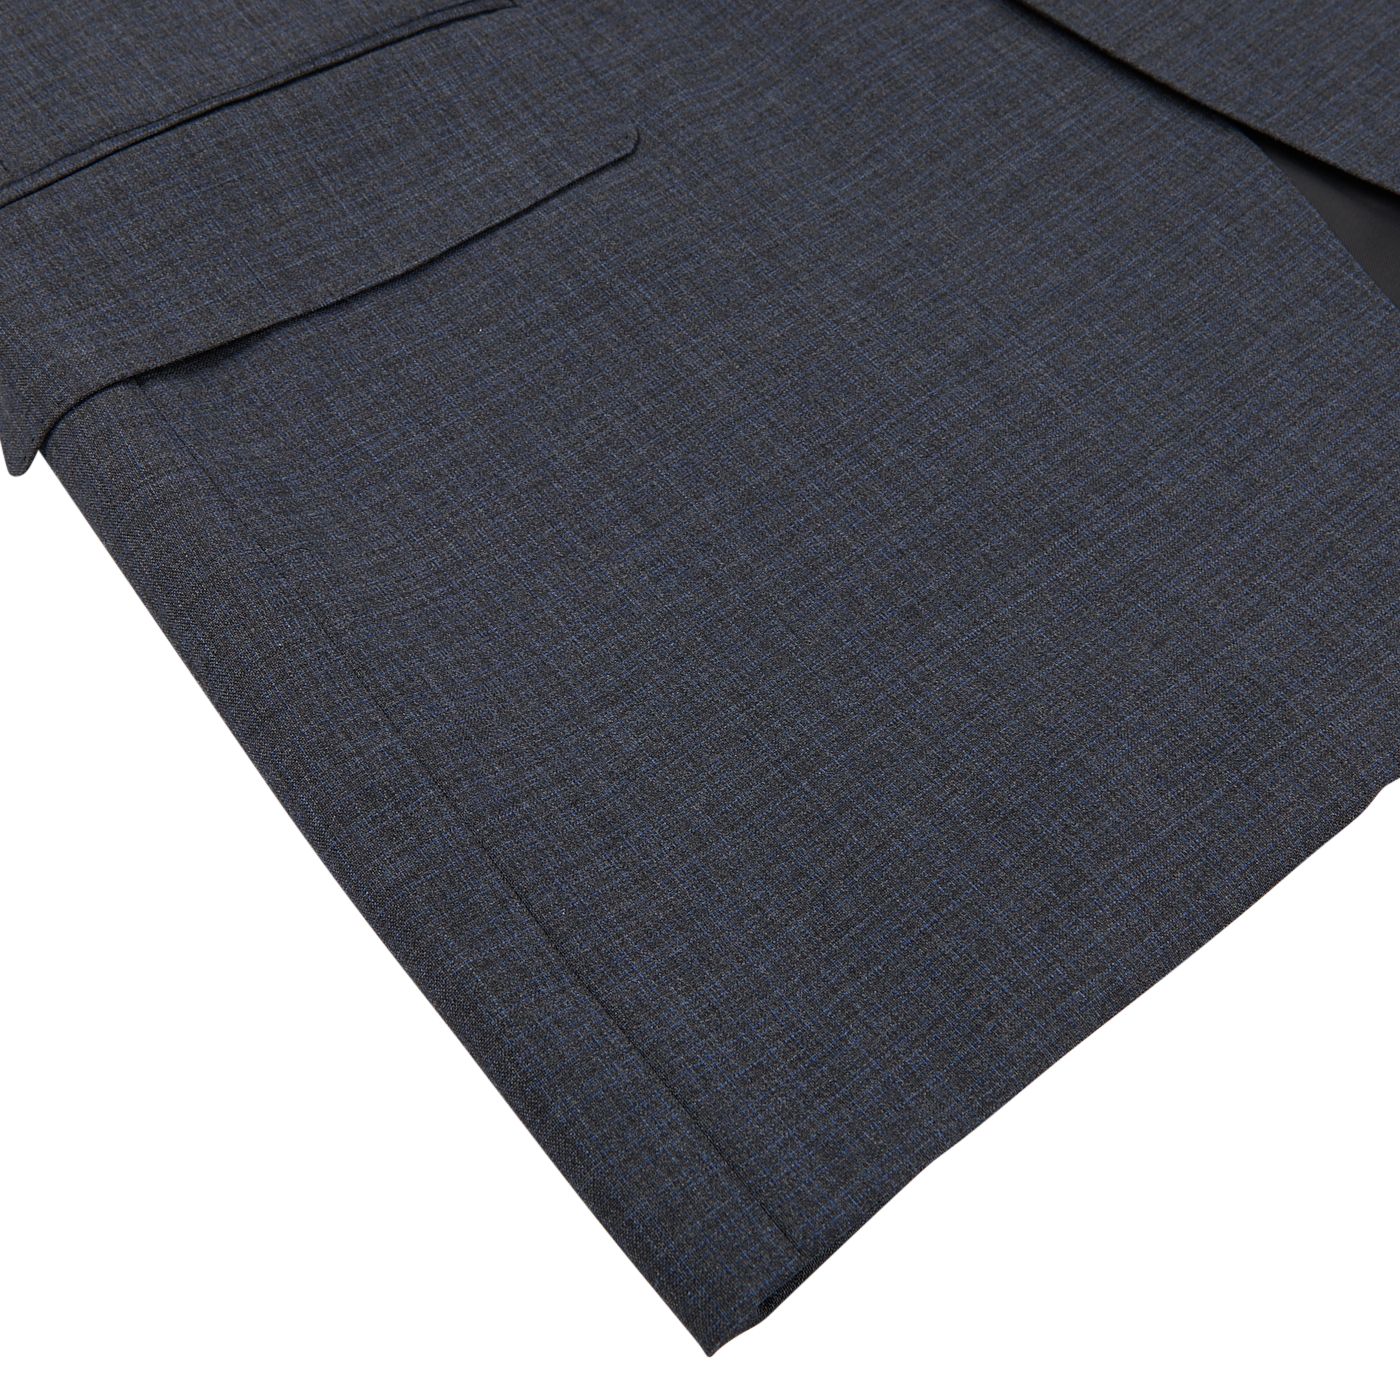 Close-up of a dark blue Canali Grey-Blue Melange Wool Suit fabric with visible weaves and tailored seams, displayed against a white background.